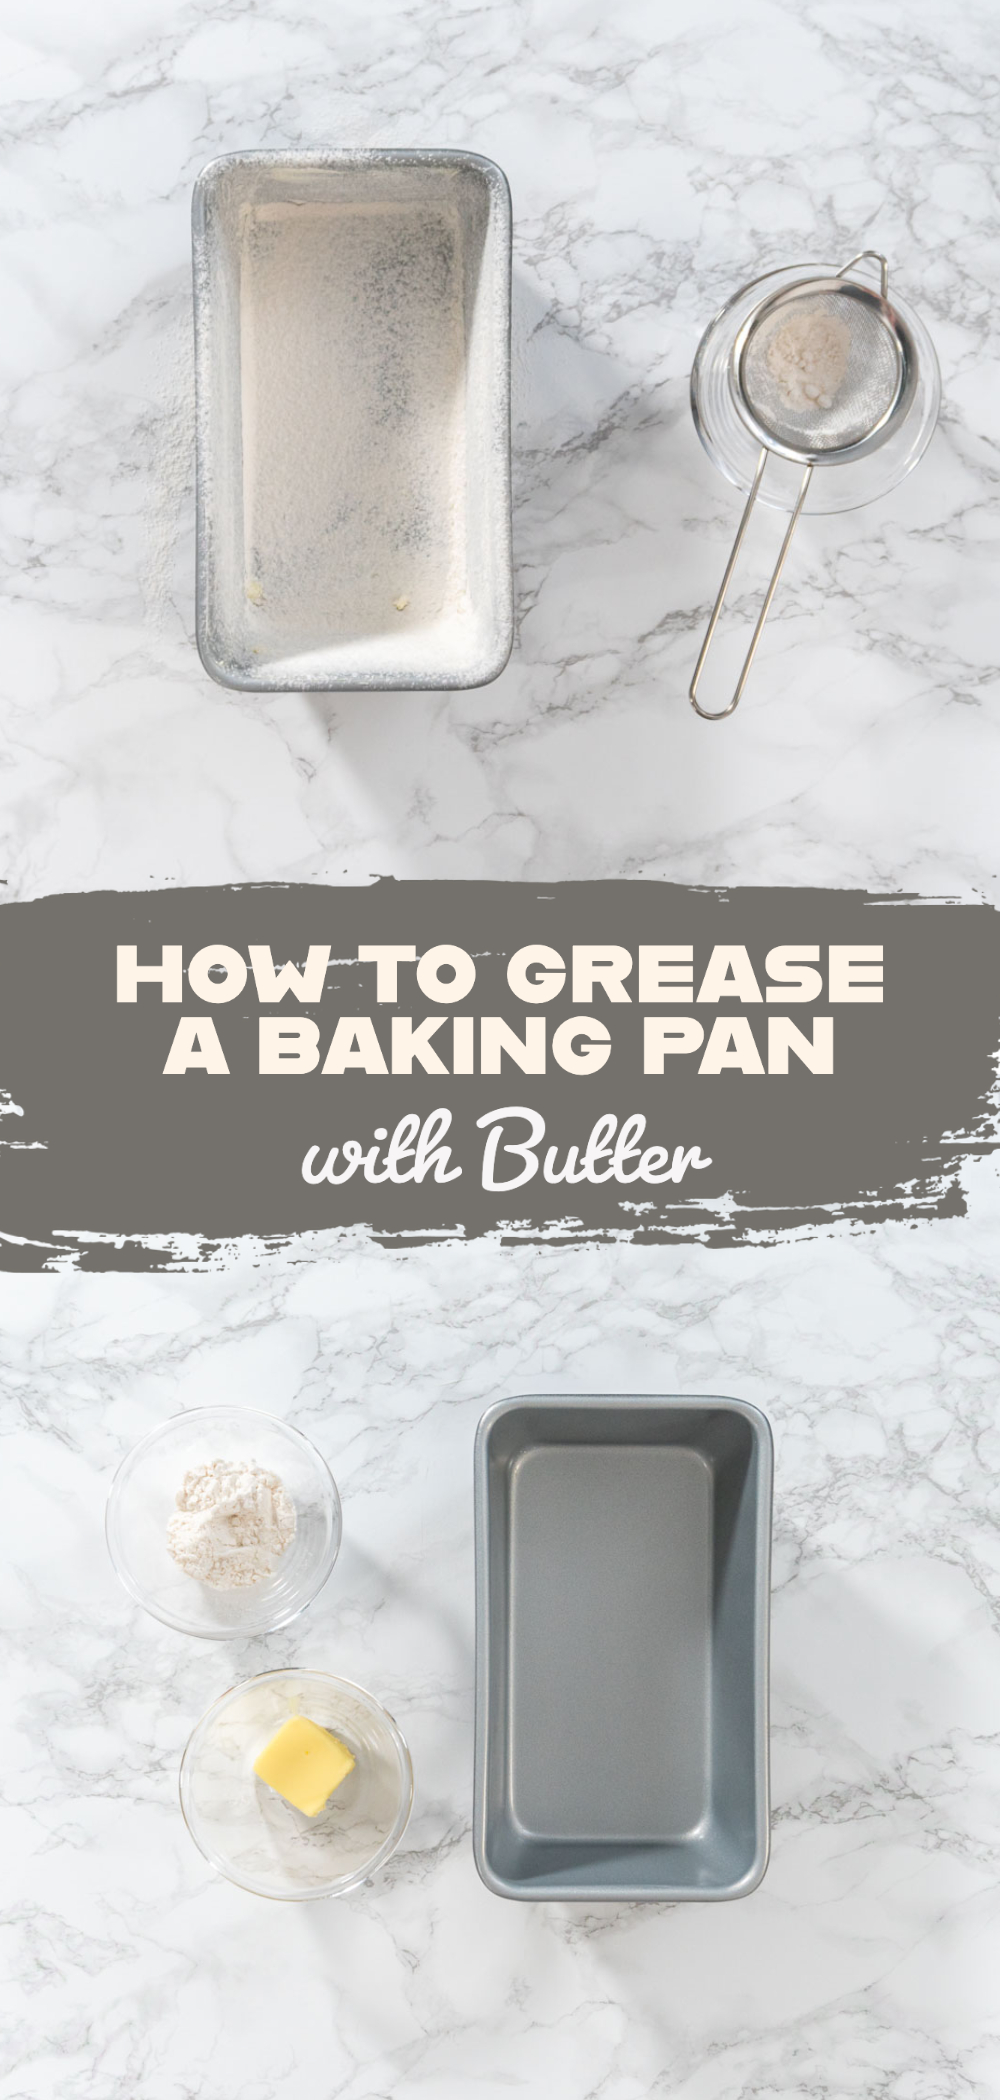 How to Grease a Baking Pan with Butter